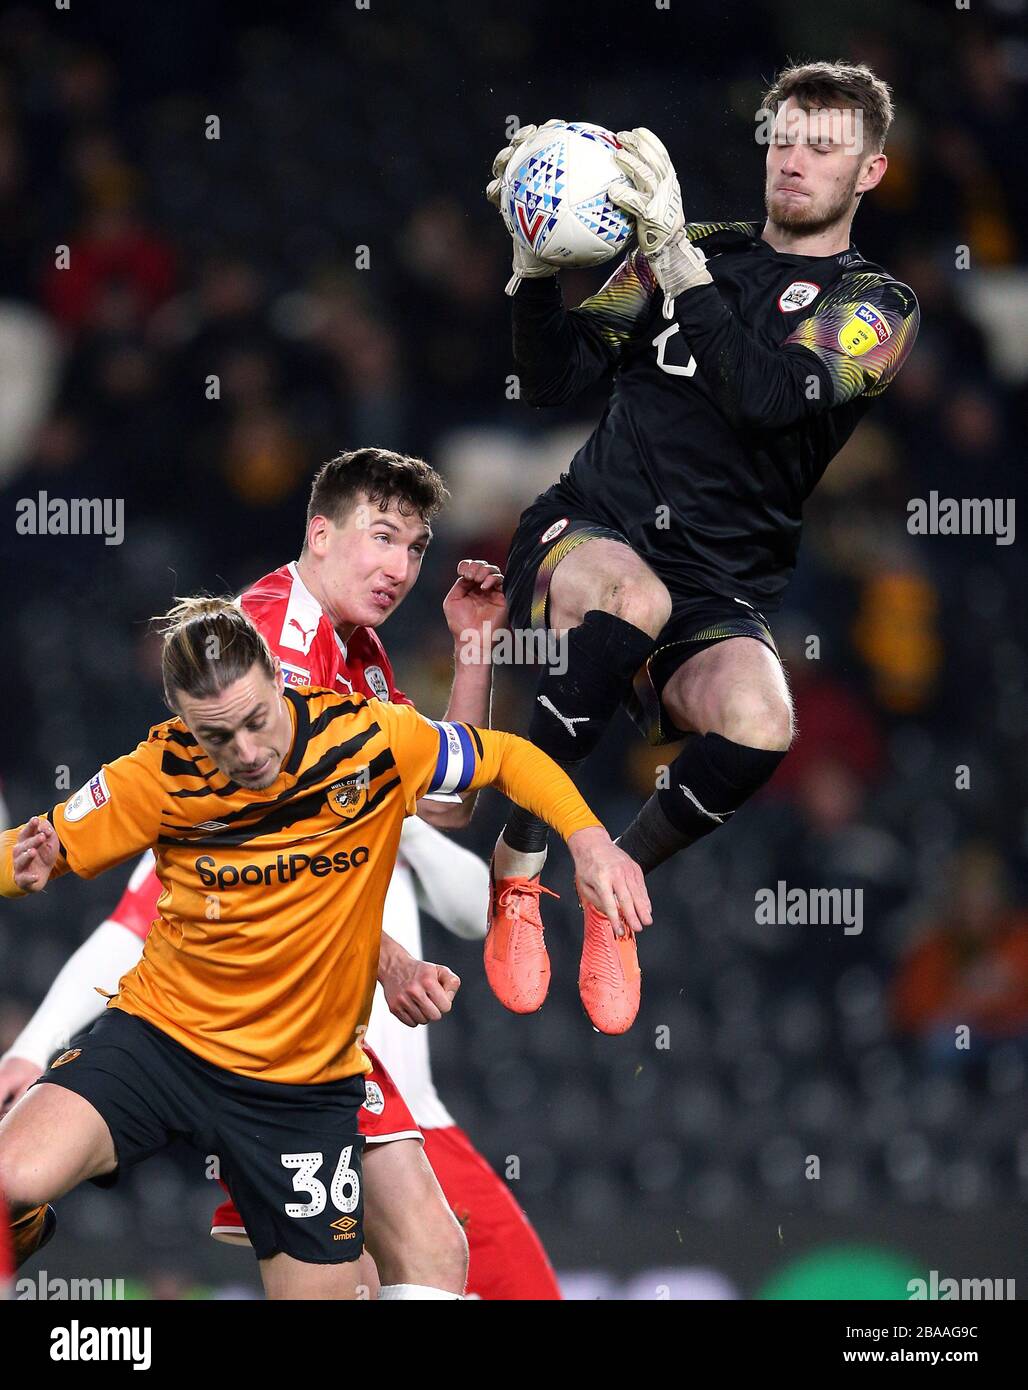 Barnsley goalkeeper Brad Collins catches the ball whilst under pressure Stock Photo